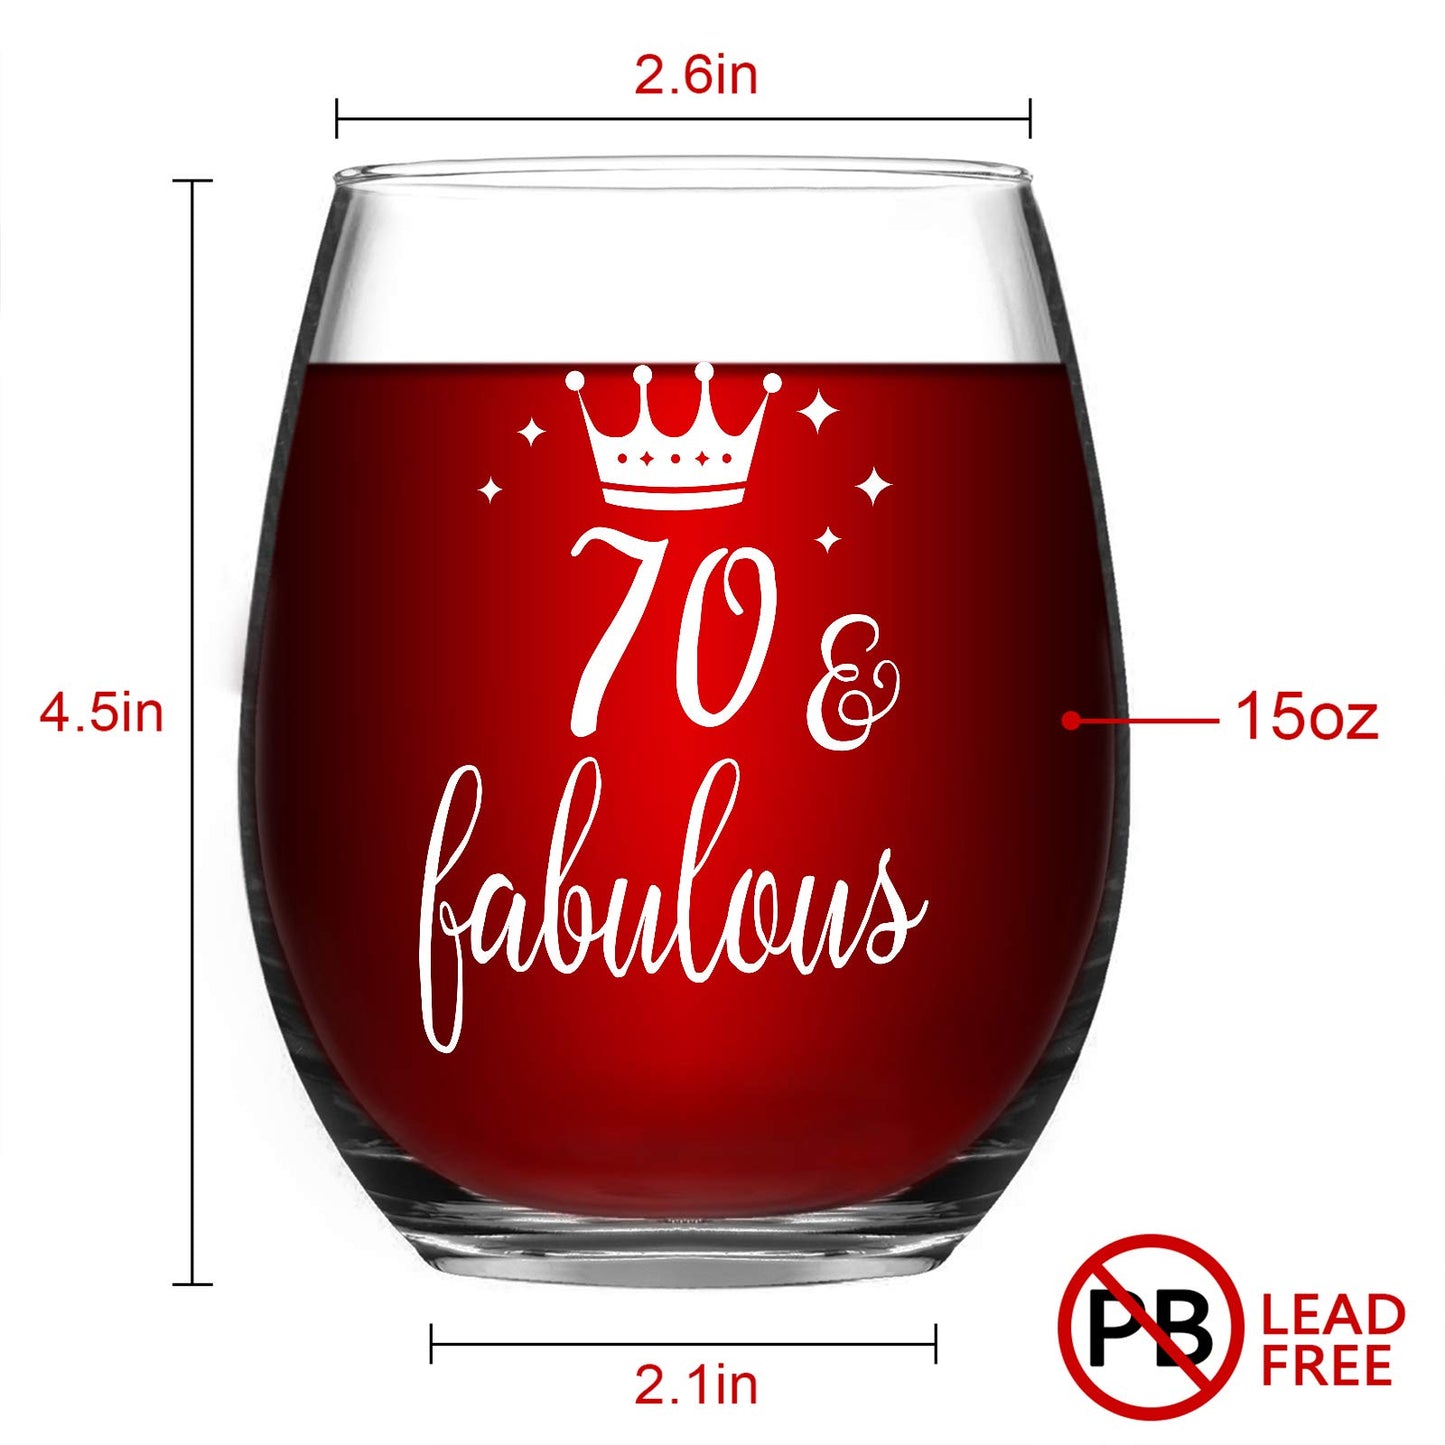 Modwnfy 70 & Fabulous Stemless Wine Glass 15 Oz, 70th Birthday Anniversary Wine Glass for Men Women Lover Friend Coworker Family, Gift Idea for Christmas Birthday Anniversary Party